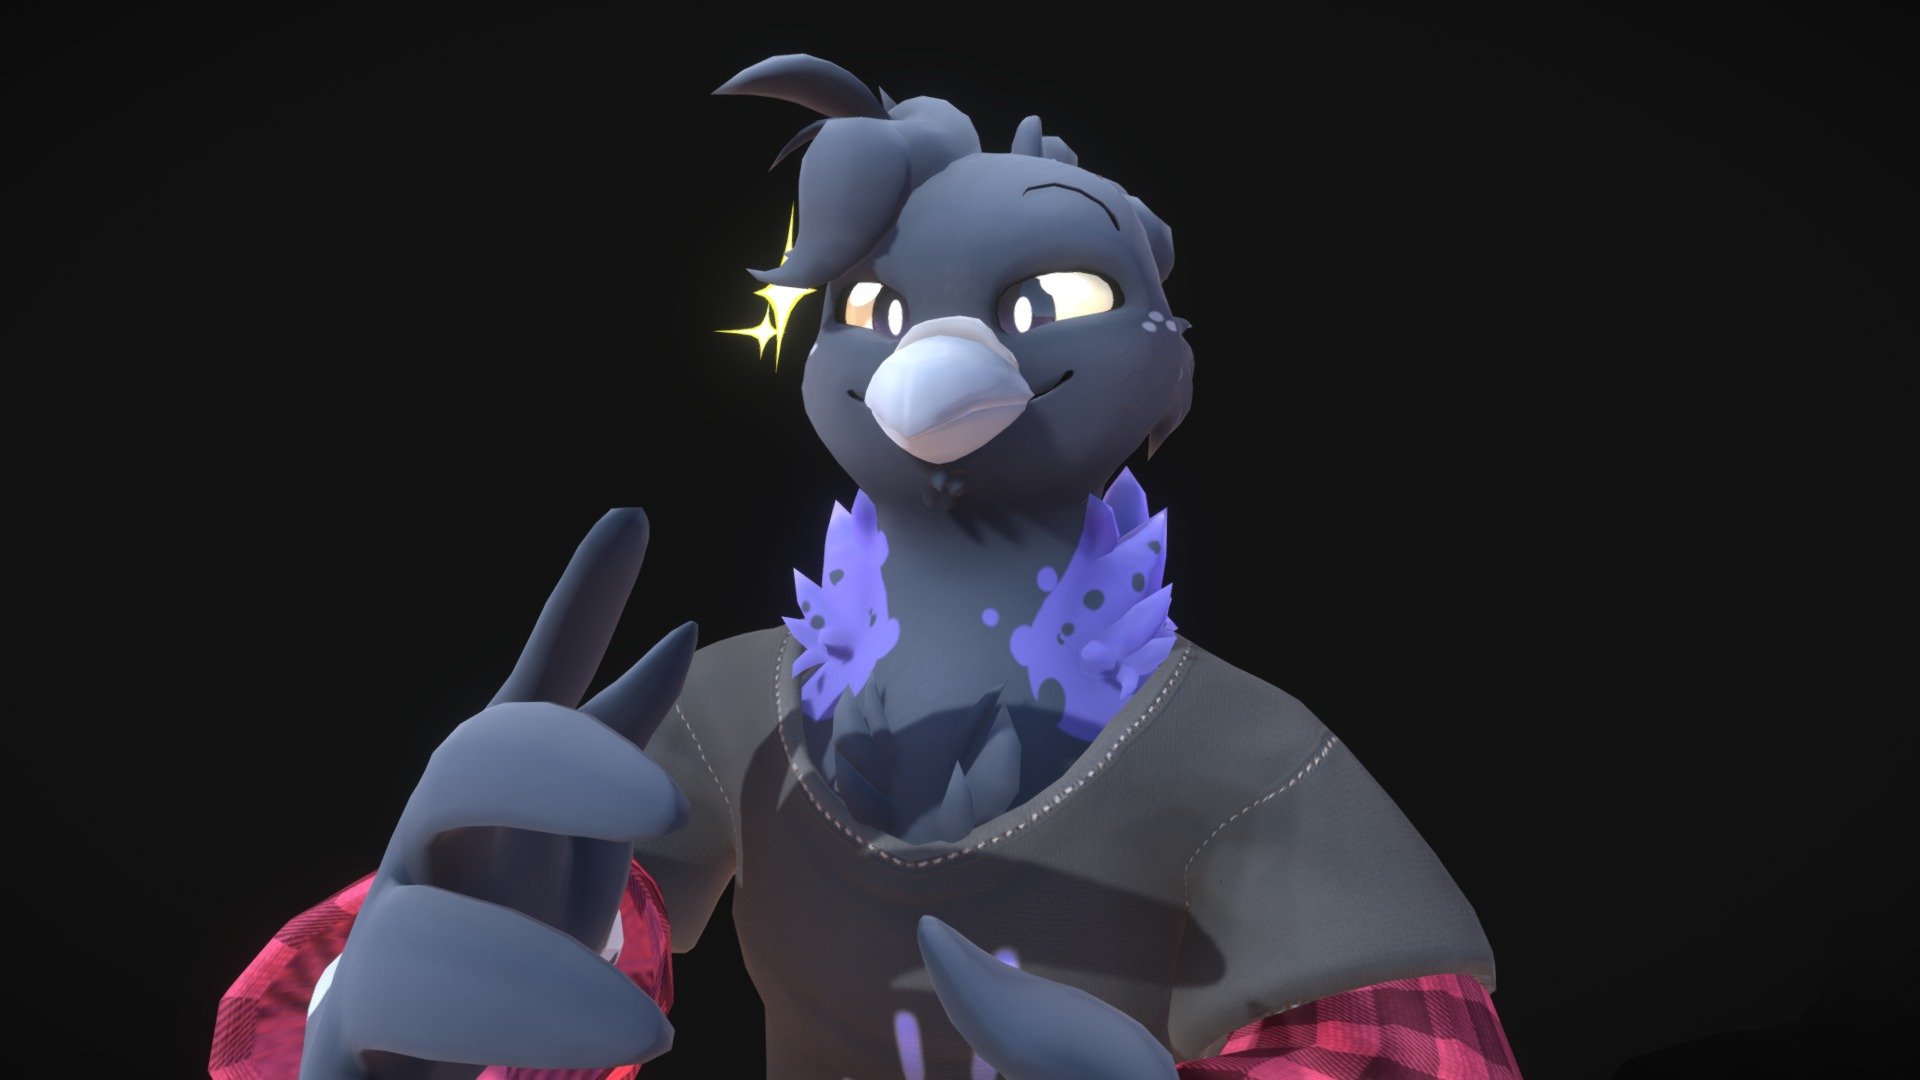 Custom VRChat avatar of Doodle the Pigeon! - Doodle the Pigeon - VRChat Avatar - 3D model by TeaLBiTZ 3d model